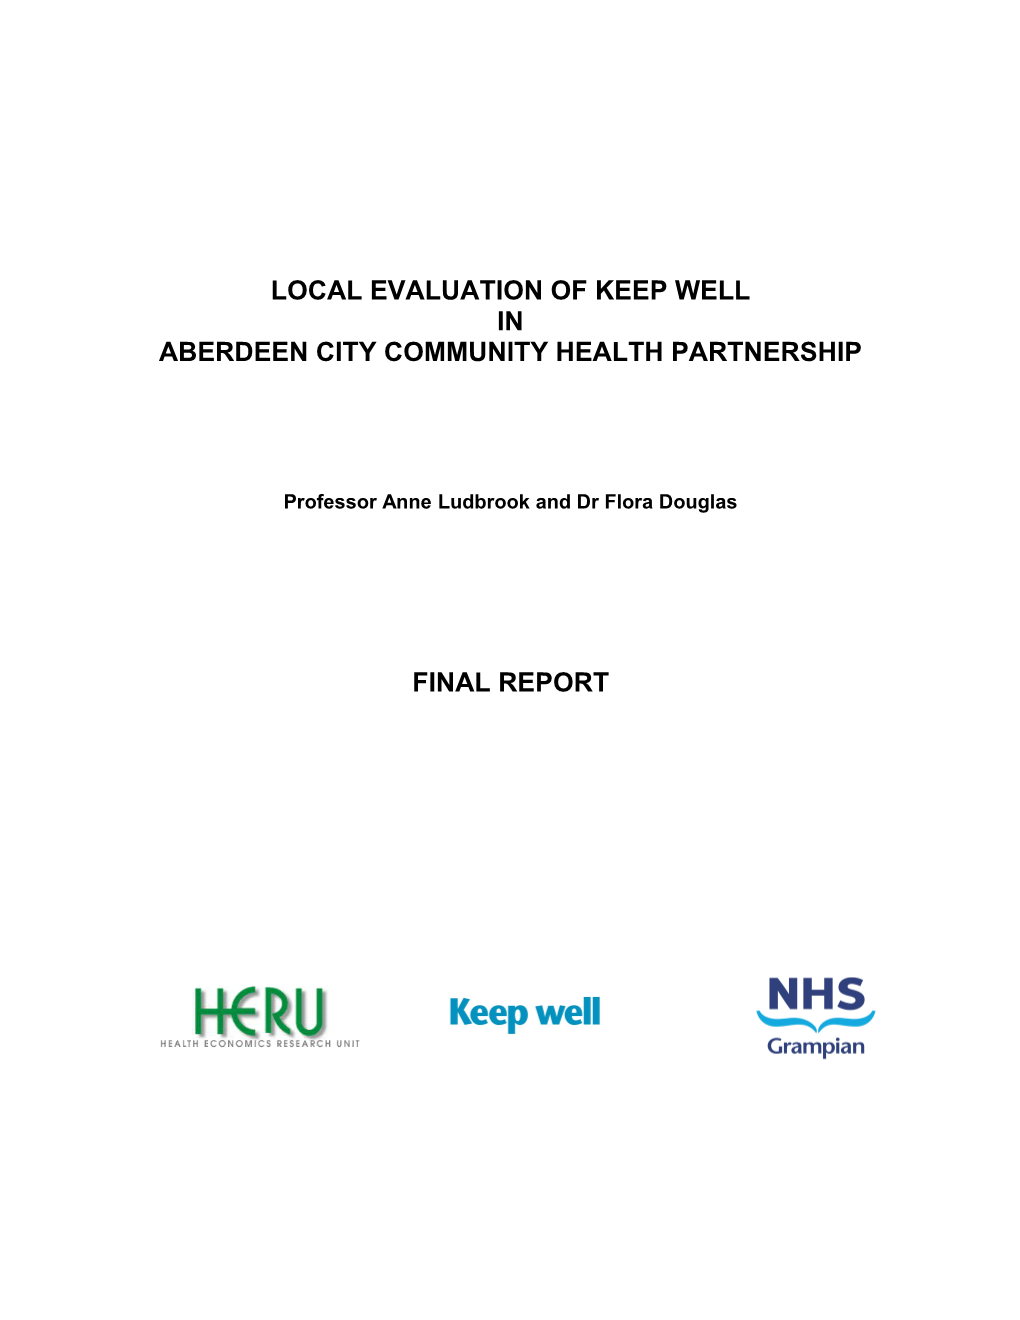 Local Evaluation of Keep Well